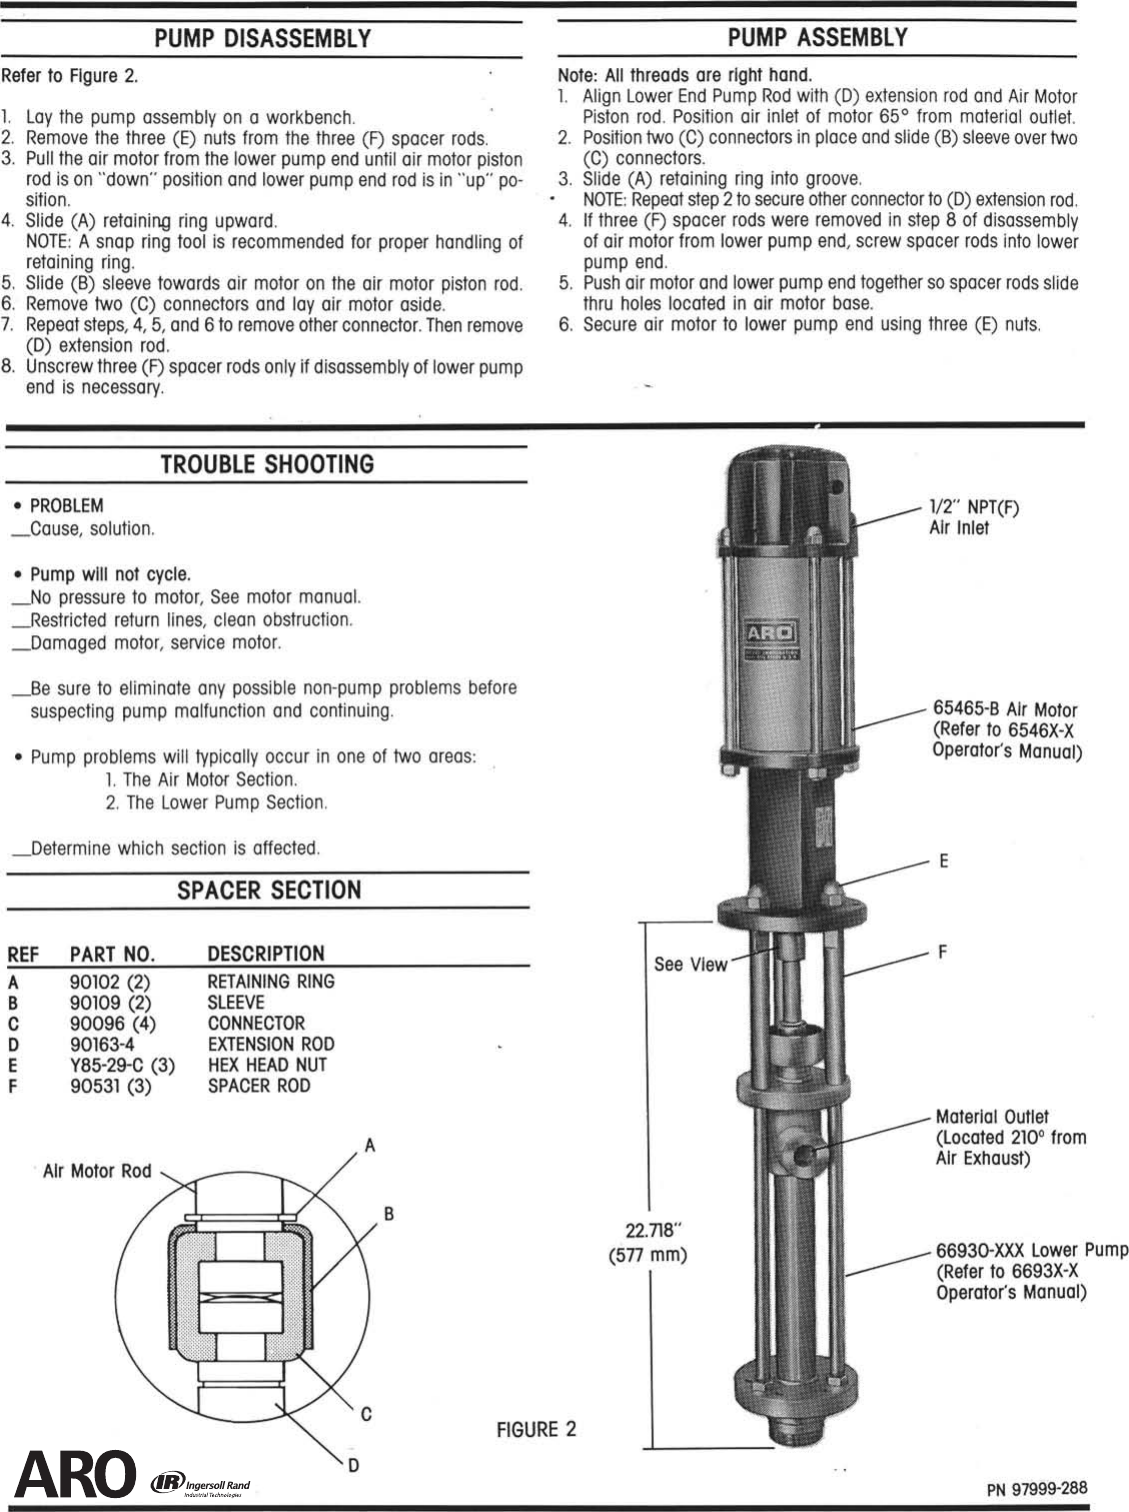 Page 2 of 2 - Ingersoll-Rand Ingersoll-Rand-Two-Ball-Pump-650475-X-Users-Manual-  Ingersoll-rand-two-ball-pump-650475-x-users-manual